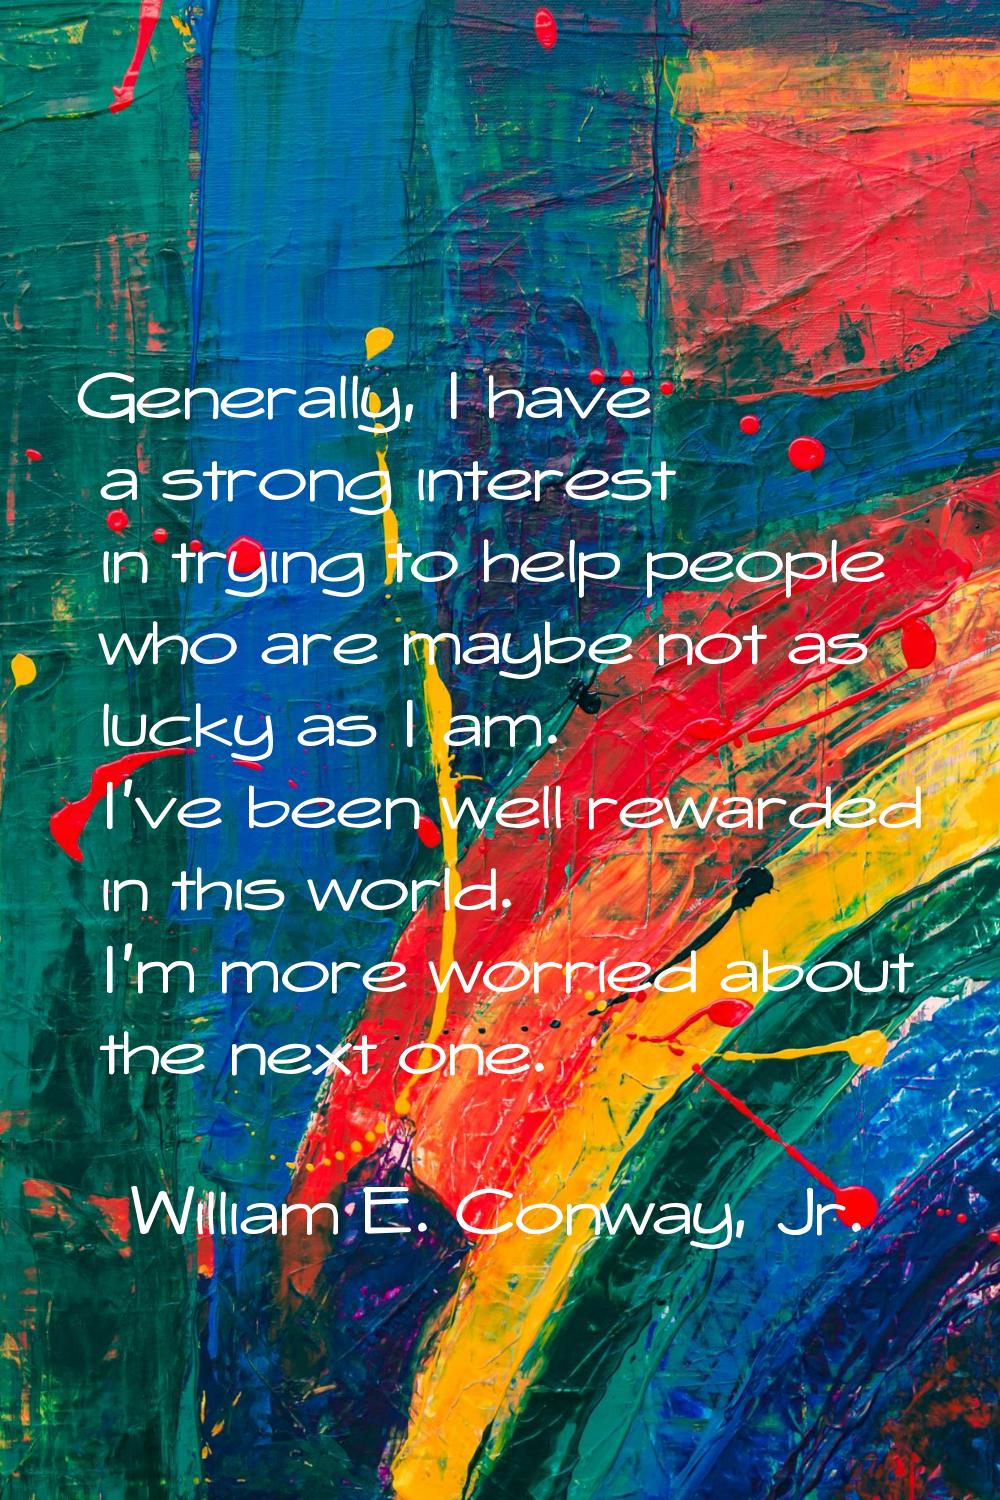 Generally, I have a strong interest in trying to help people who are maybe not as lucky as I am. I'